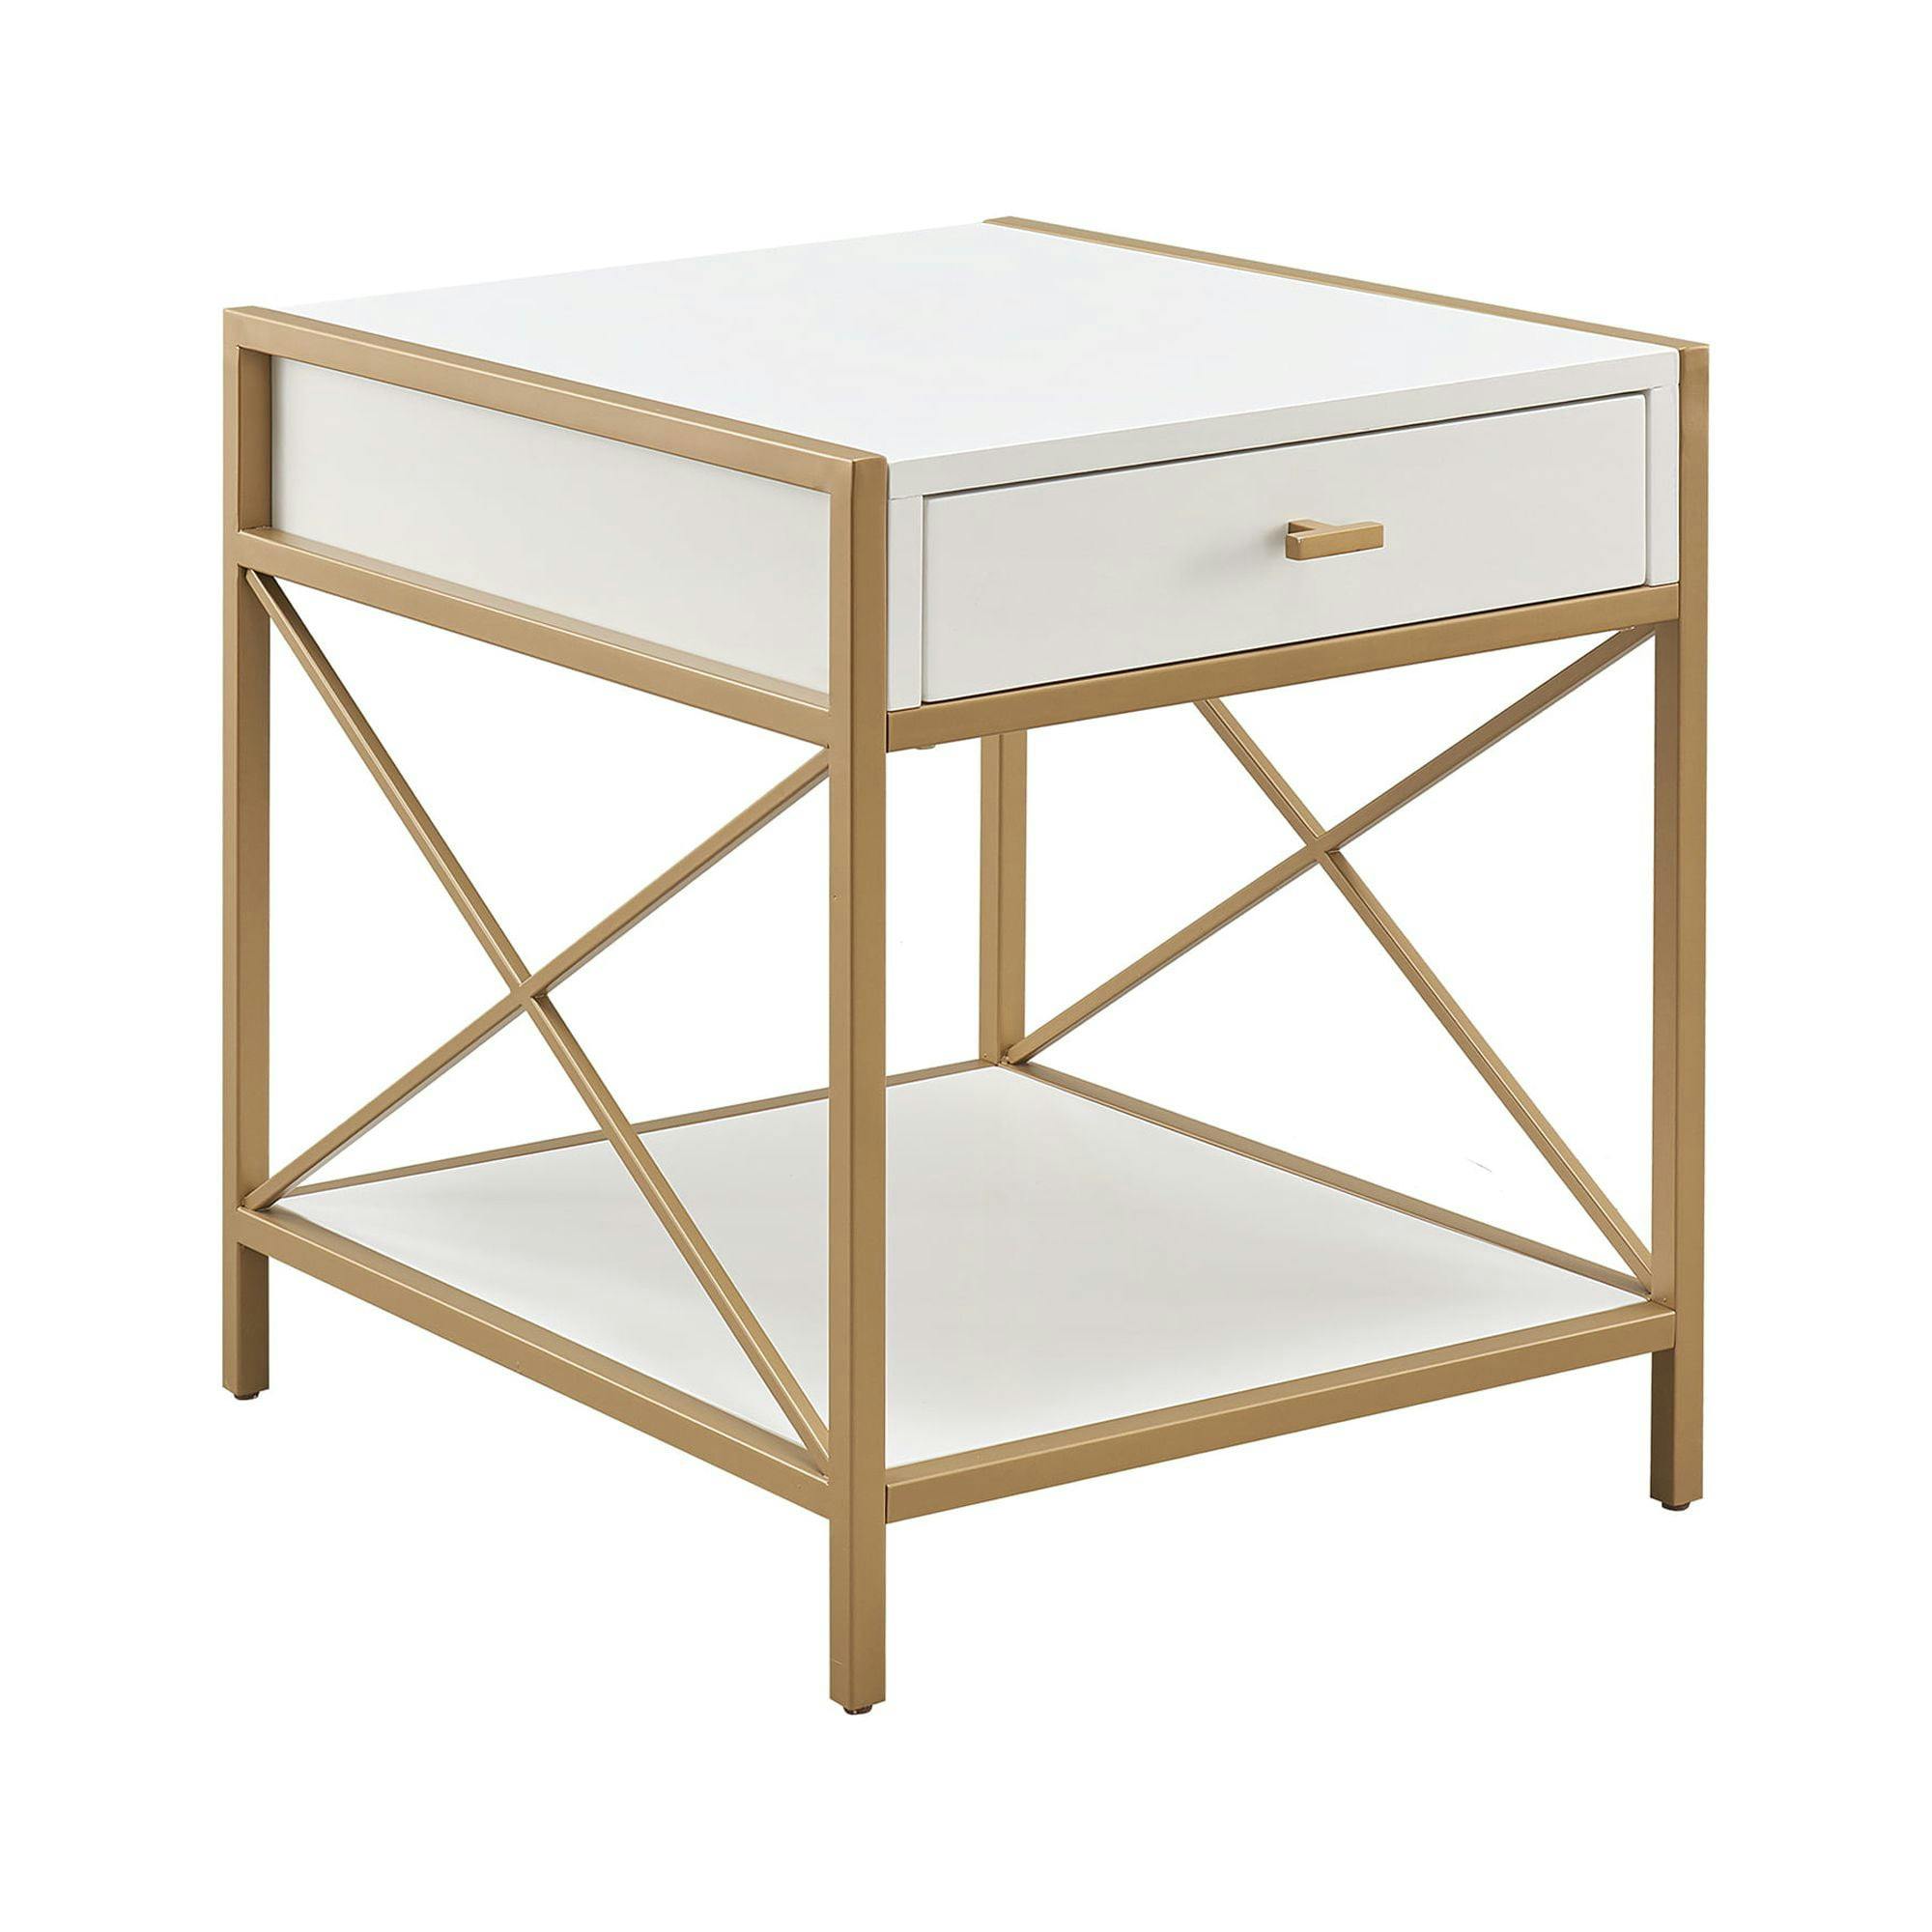 Claudette Gold Metal Frame and White Wood Top End Table with Drawer